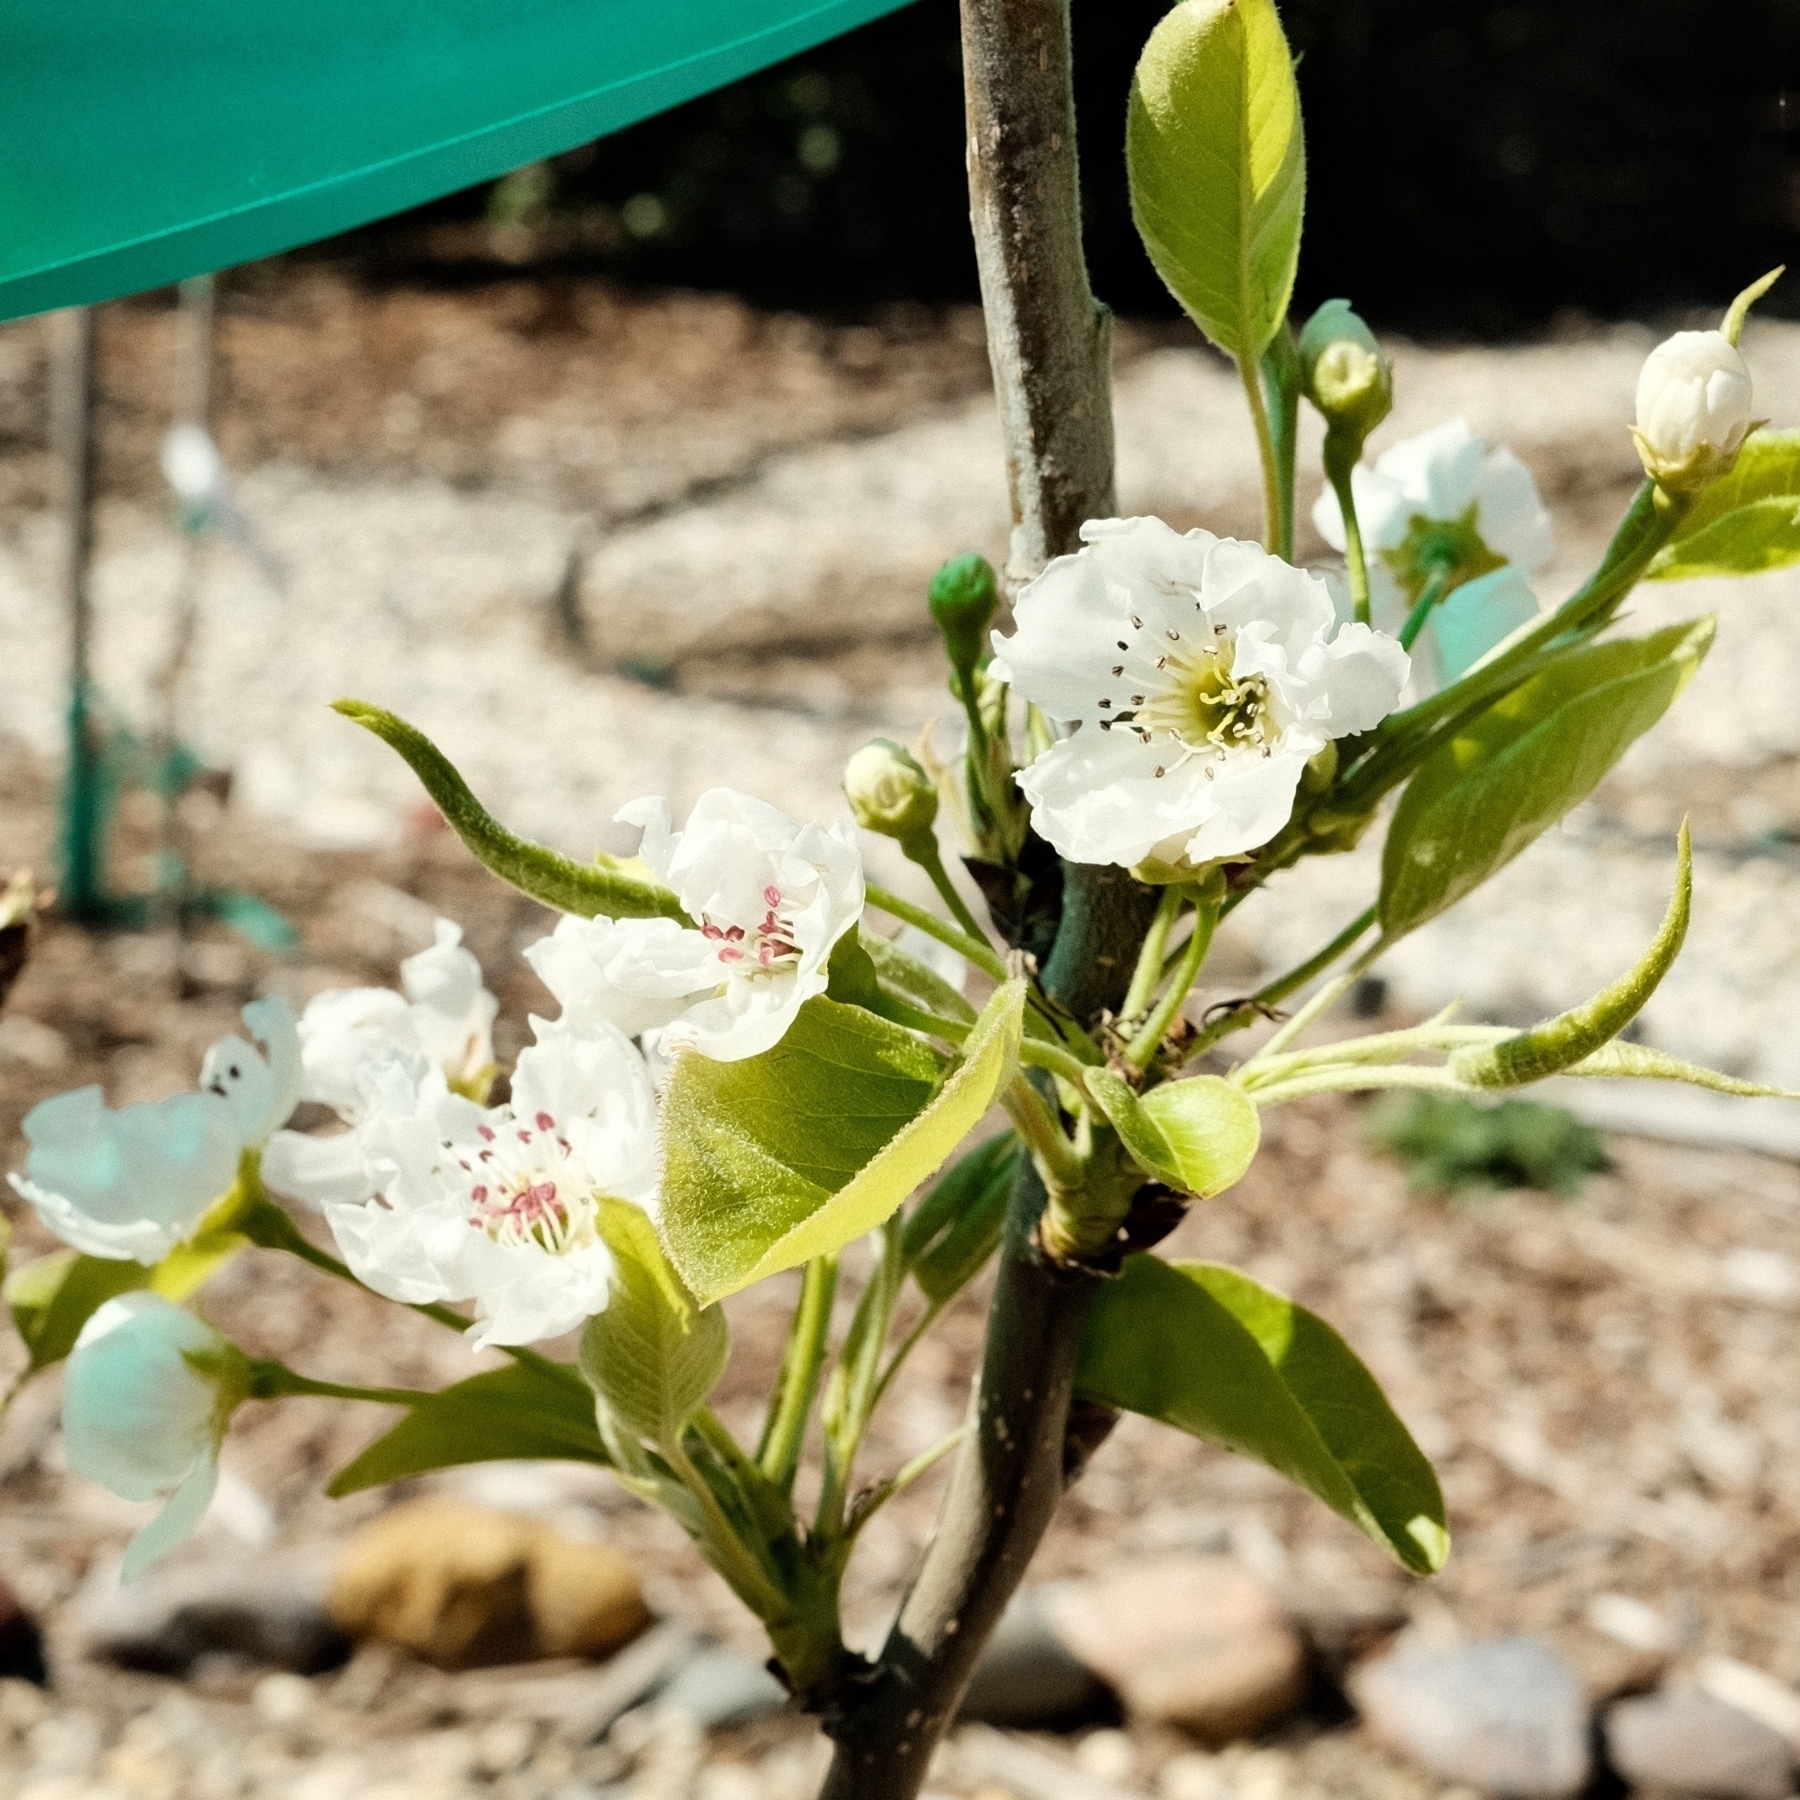 Three open white flowers at the top of a very young thin leafing out tree. A stake is next to it, keeping it up right. The background is composed of blurred out gravel.